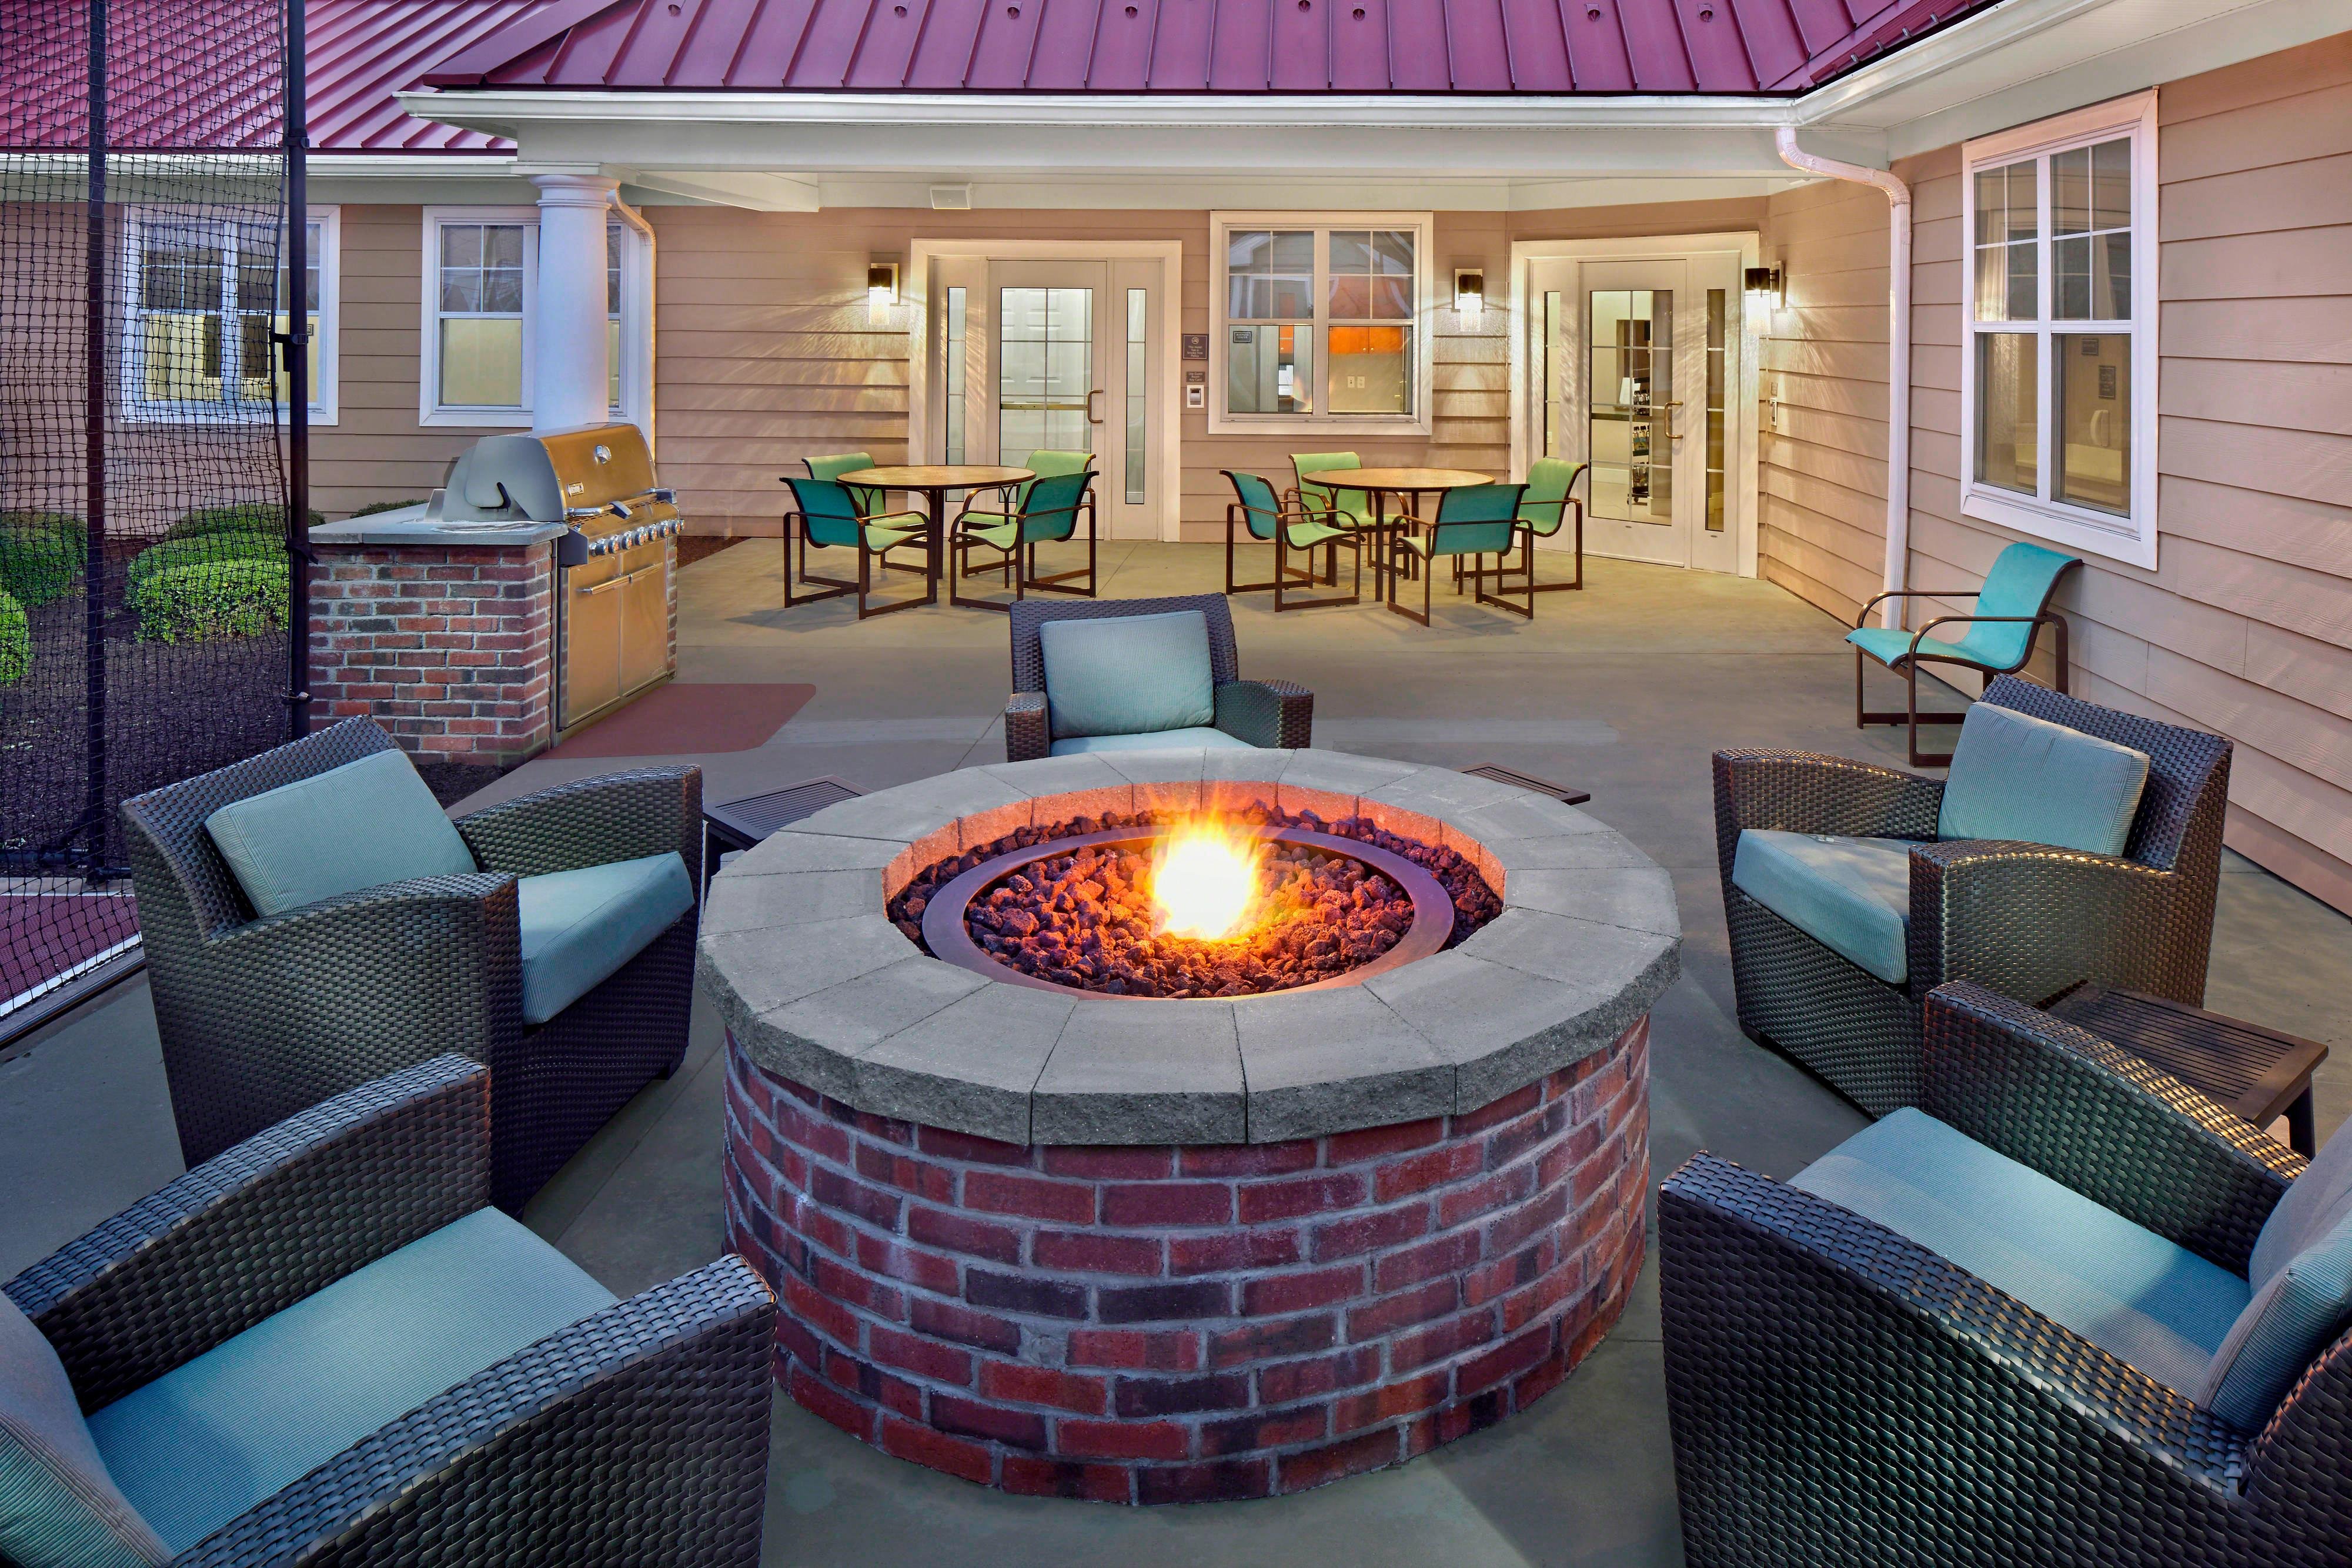 Outdoor Fire Pit & Grill